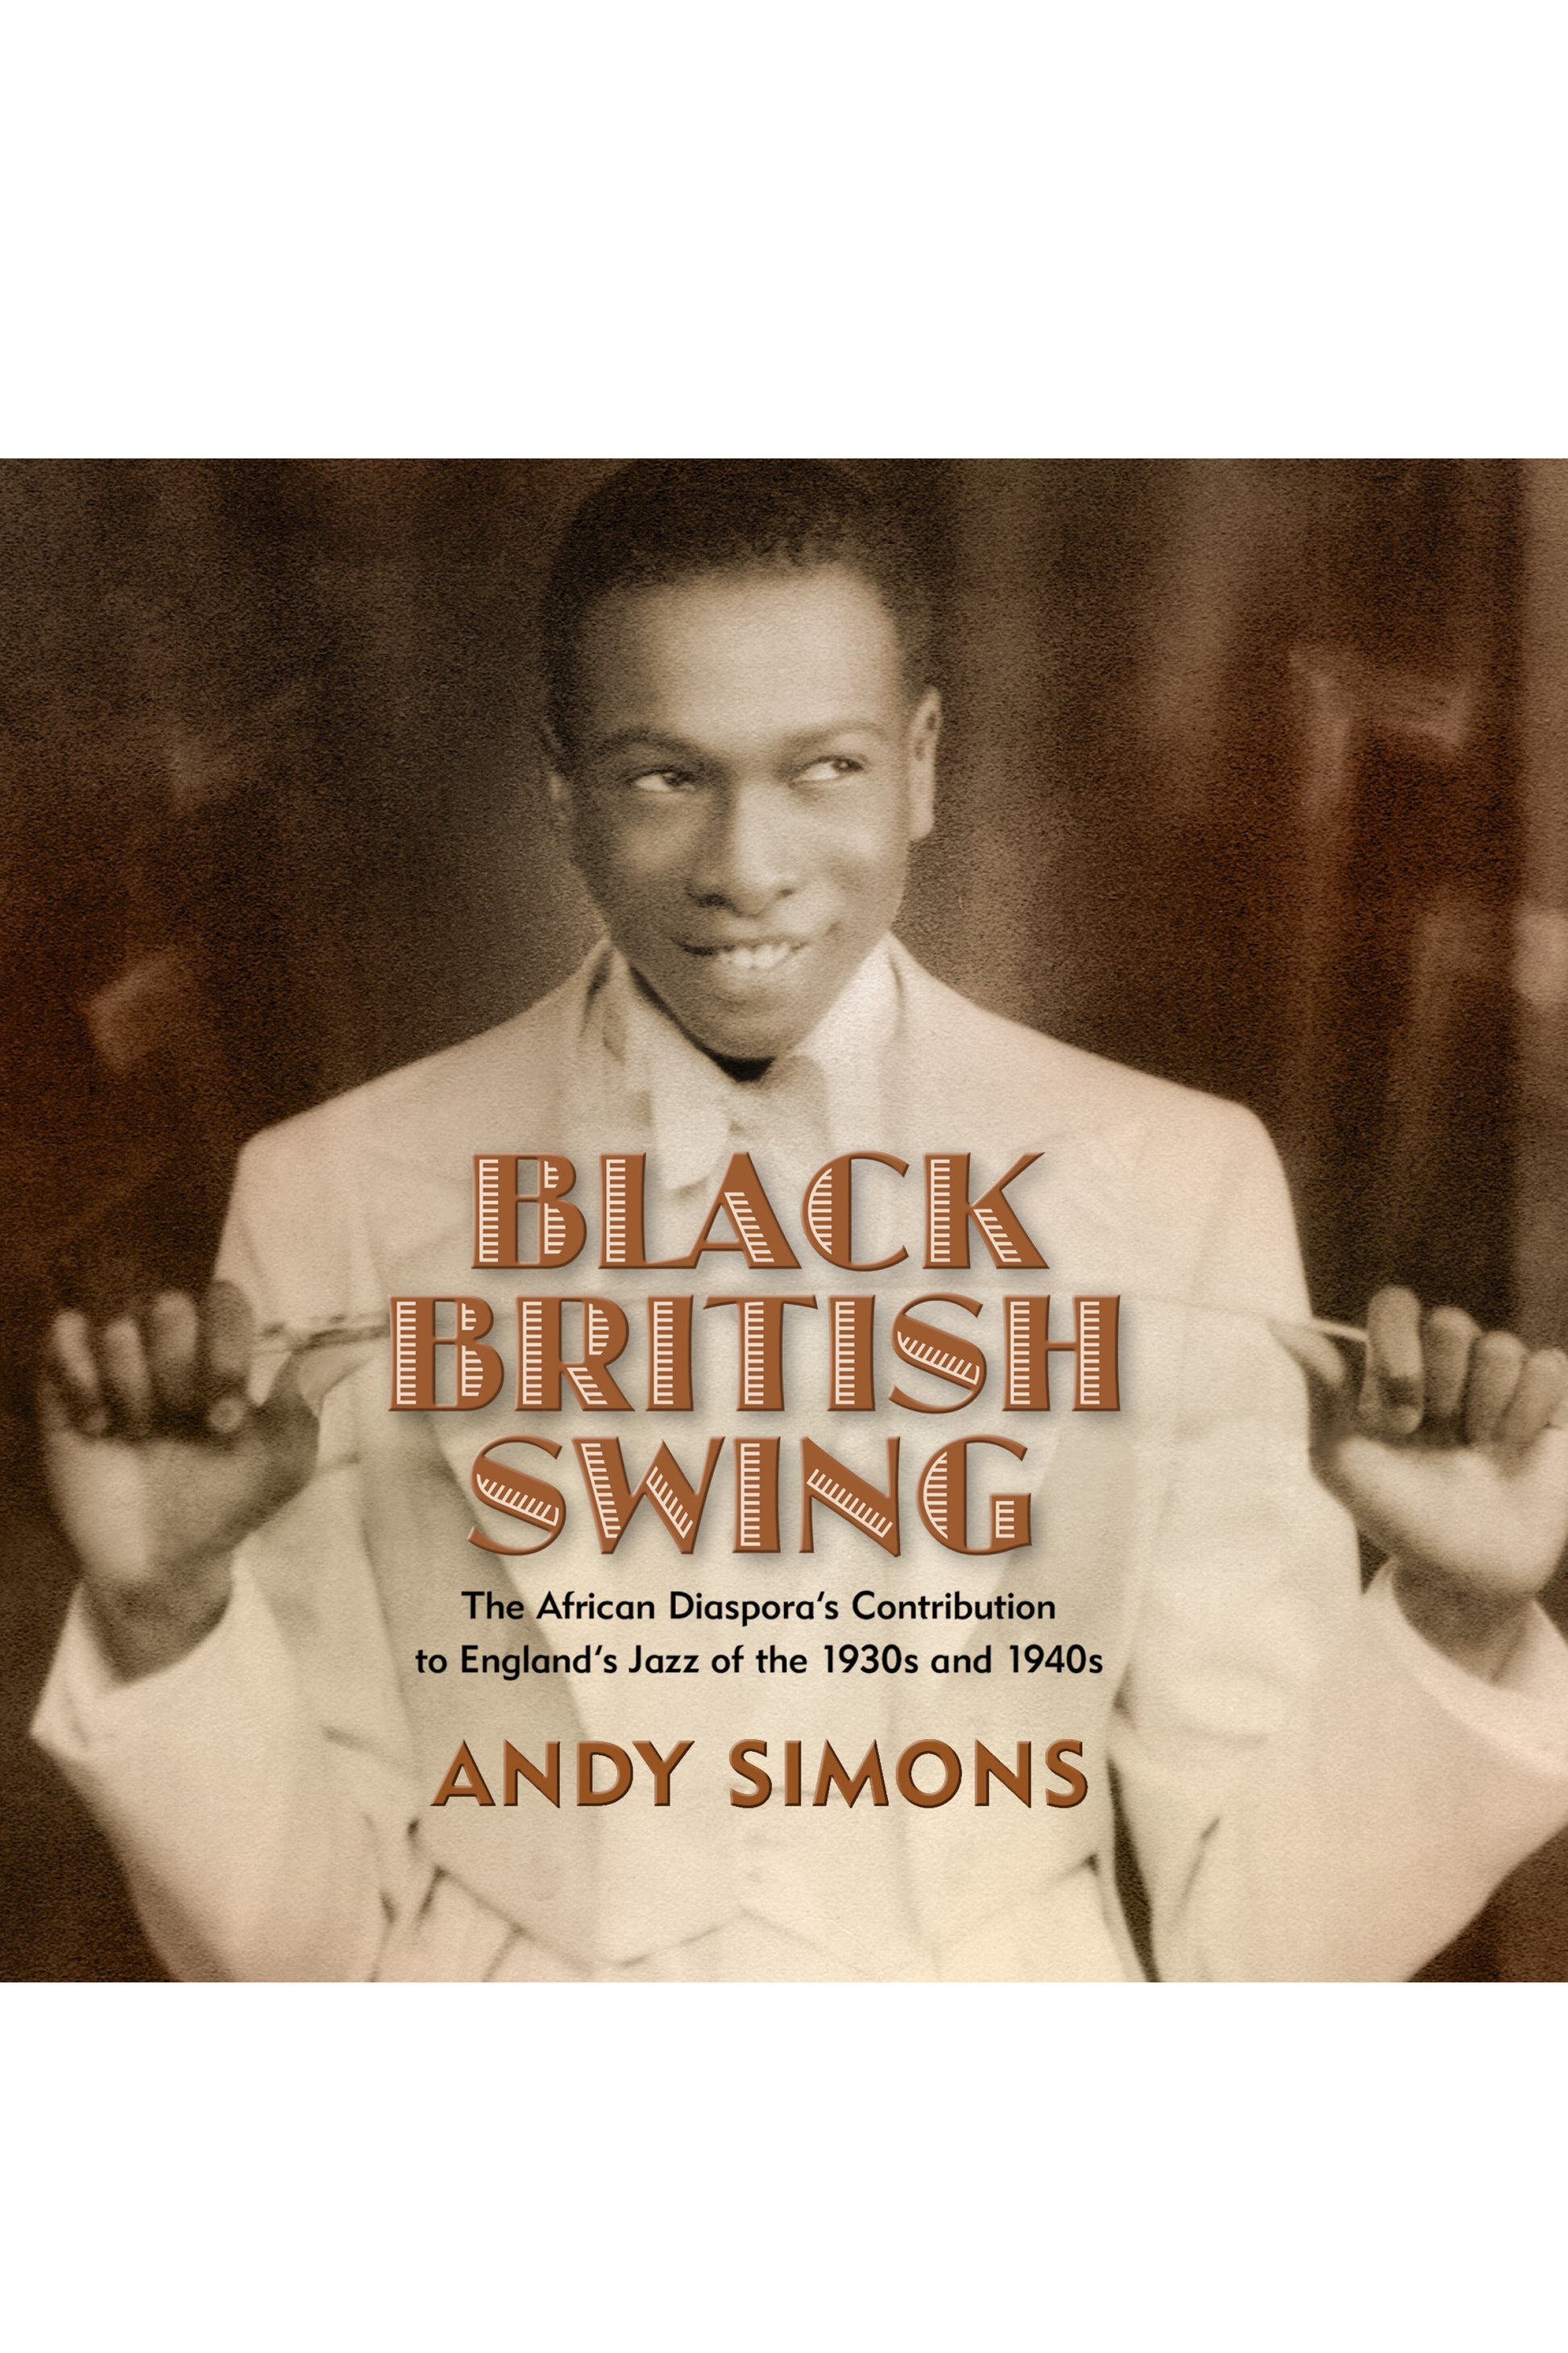 Black British Swing: The African Diaspora's Contribution to England's Jazz of the 1930s and 1940s